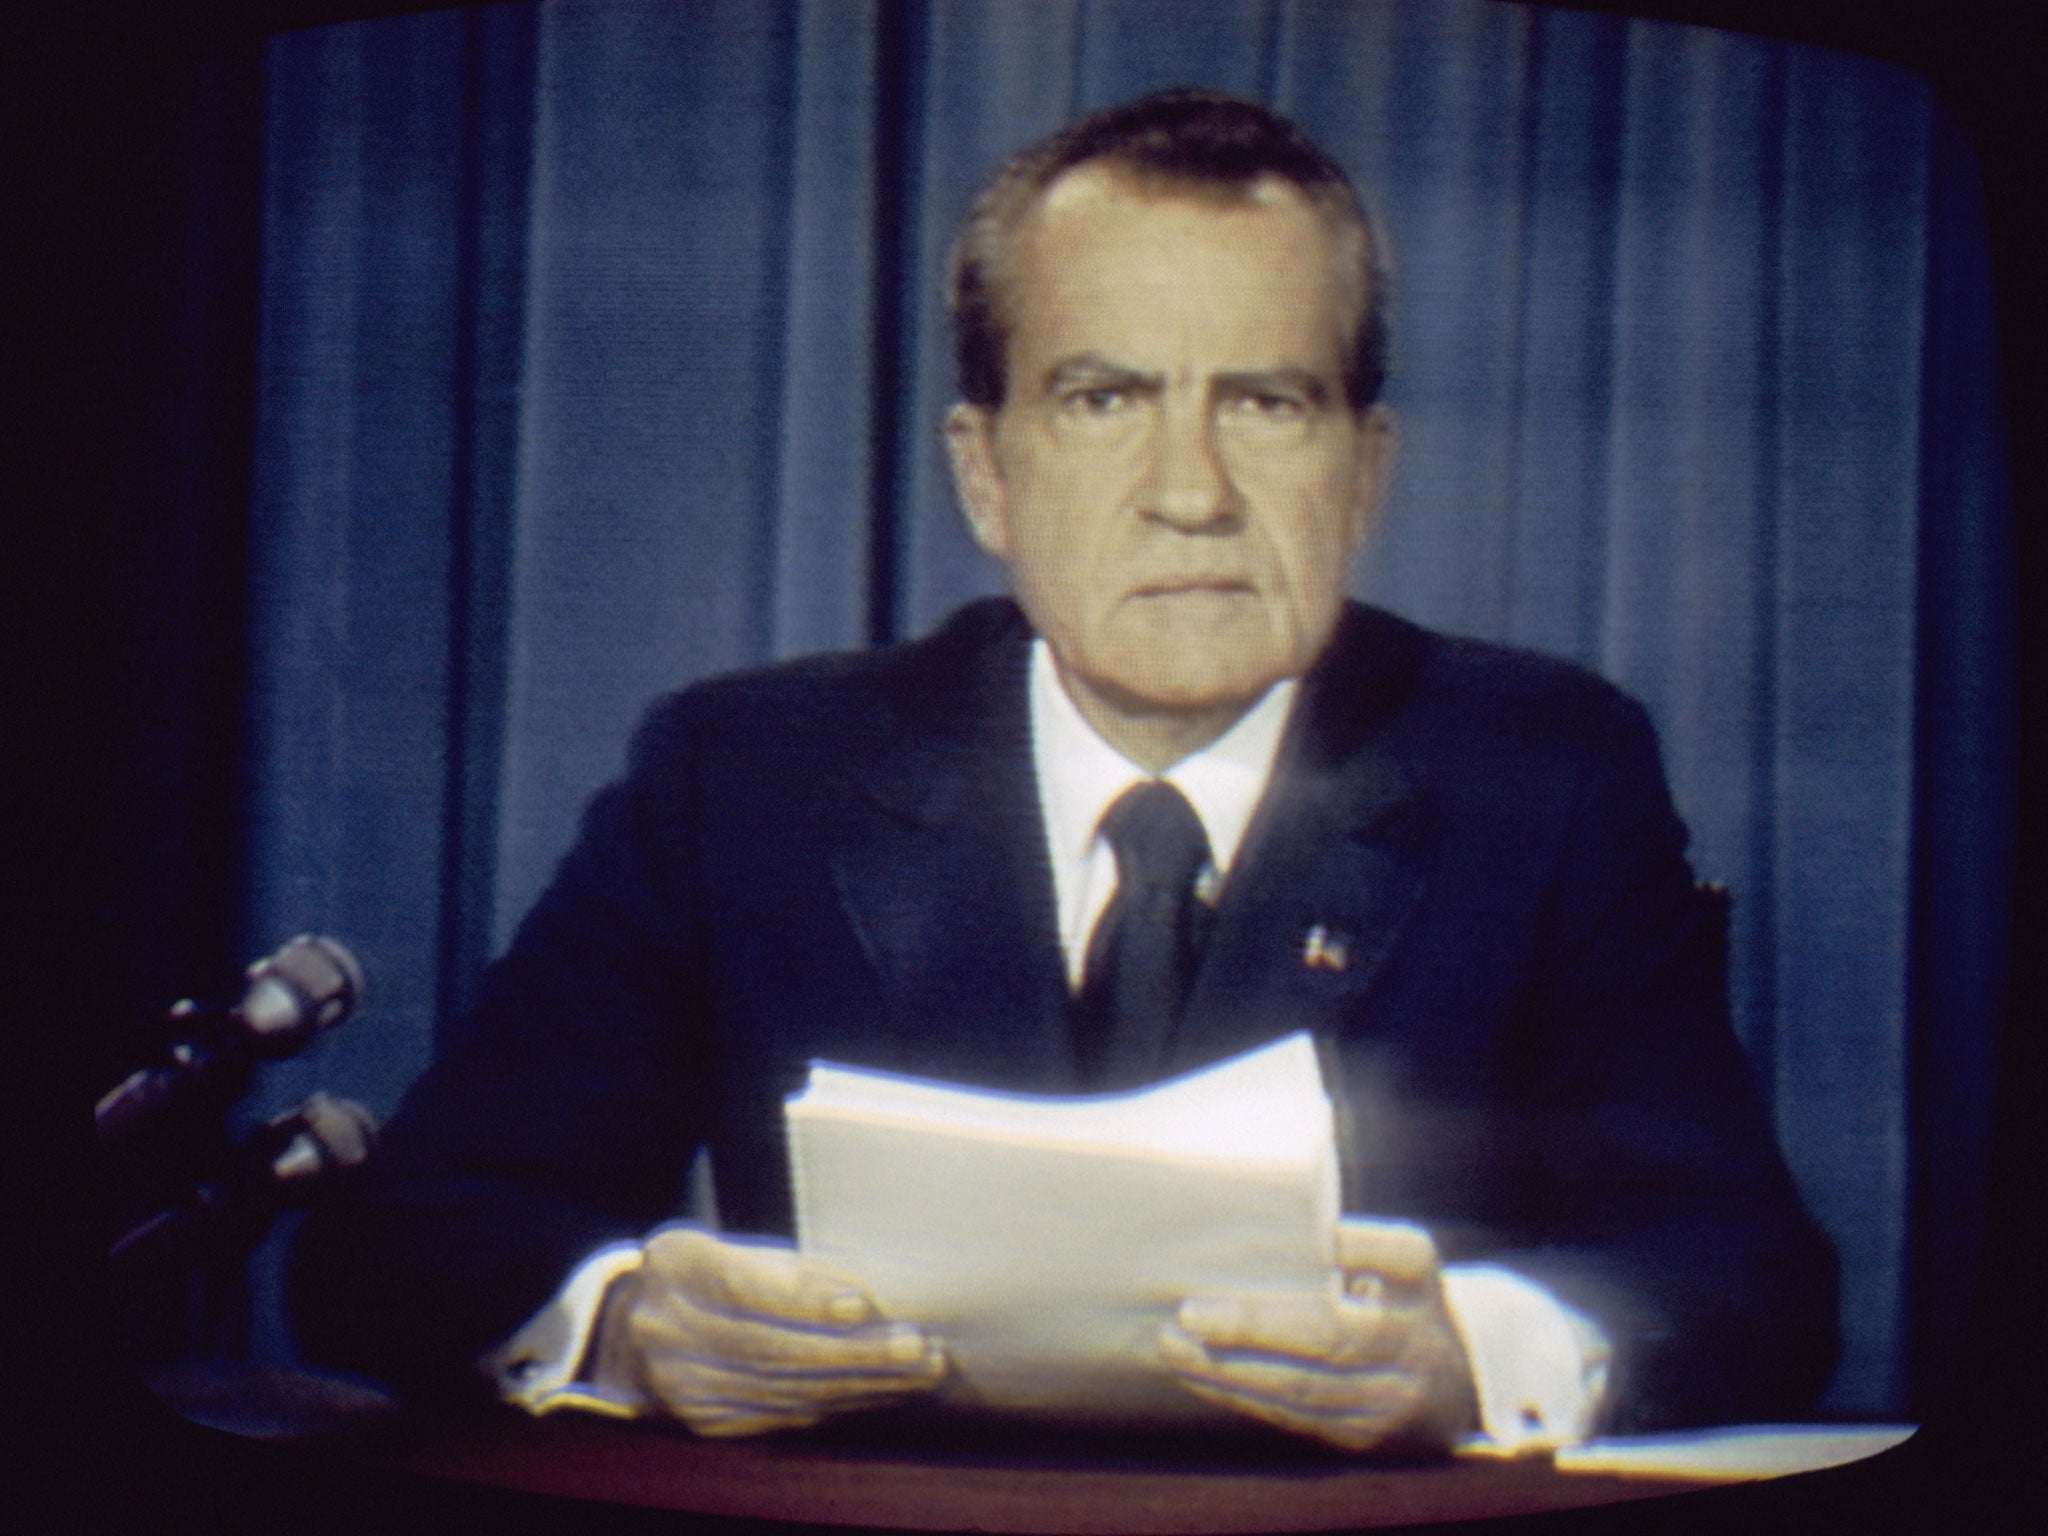 Easy eviction: Richard Nixon’s violence-free removal was possible because the alternative left US society essentially unchanged